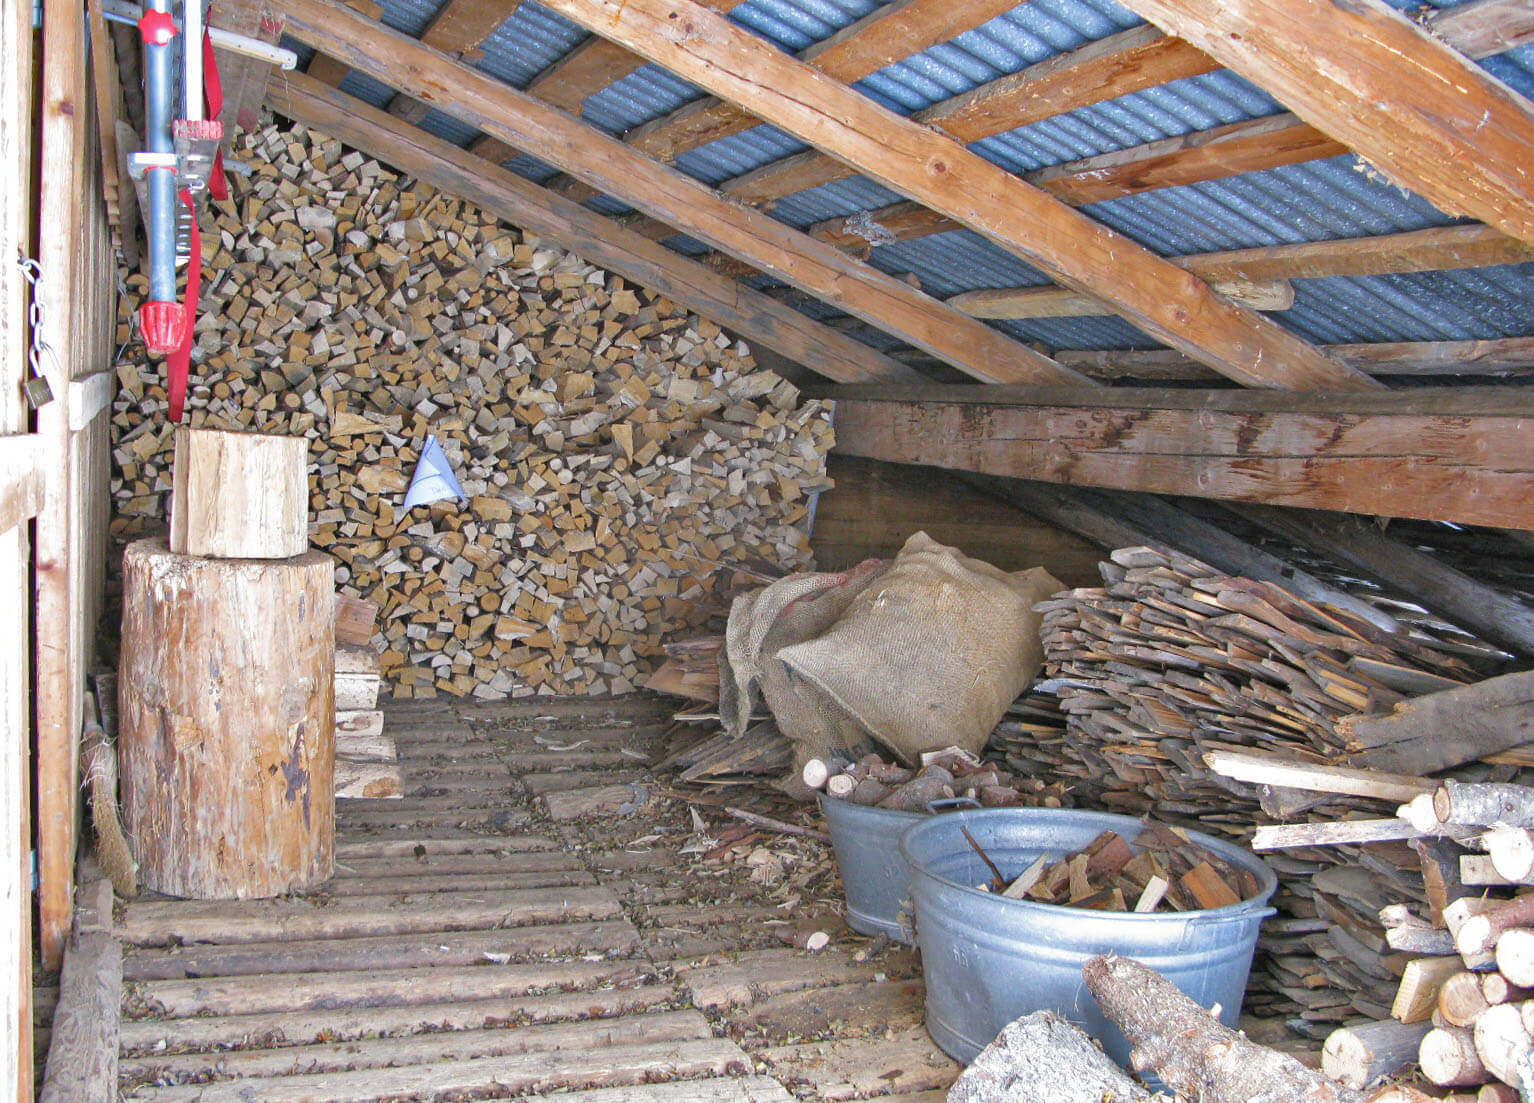 Timber store